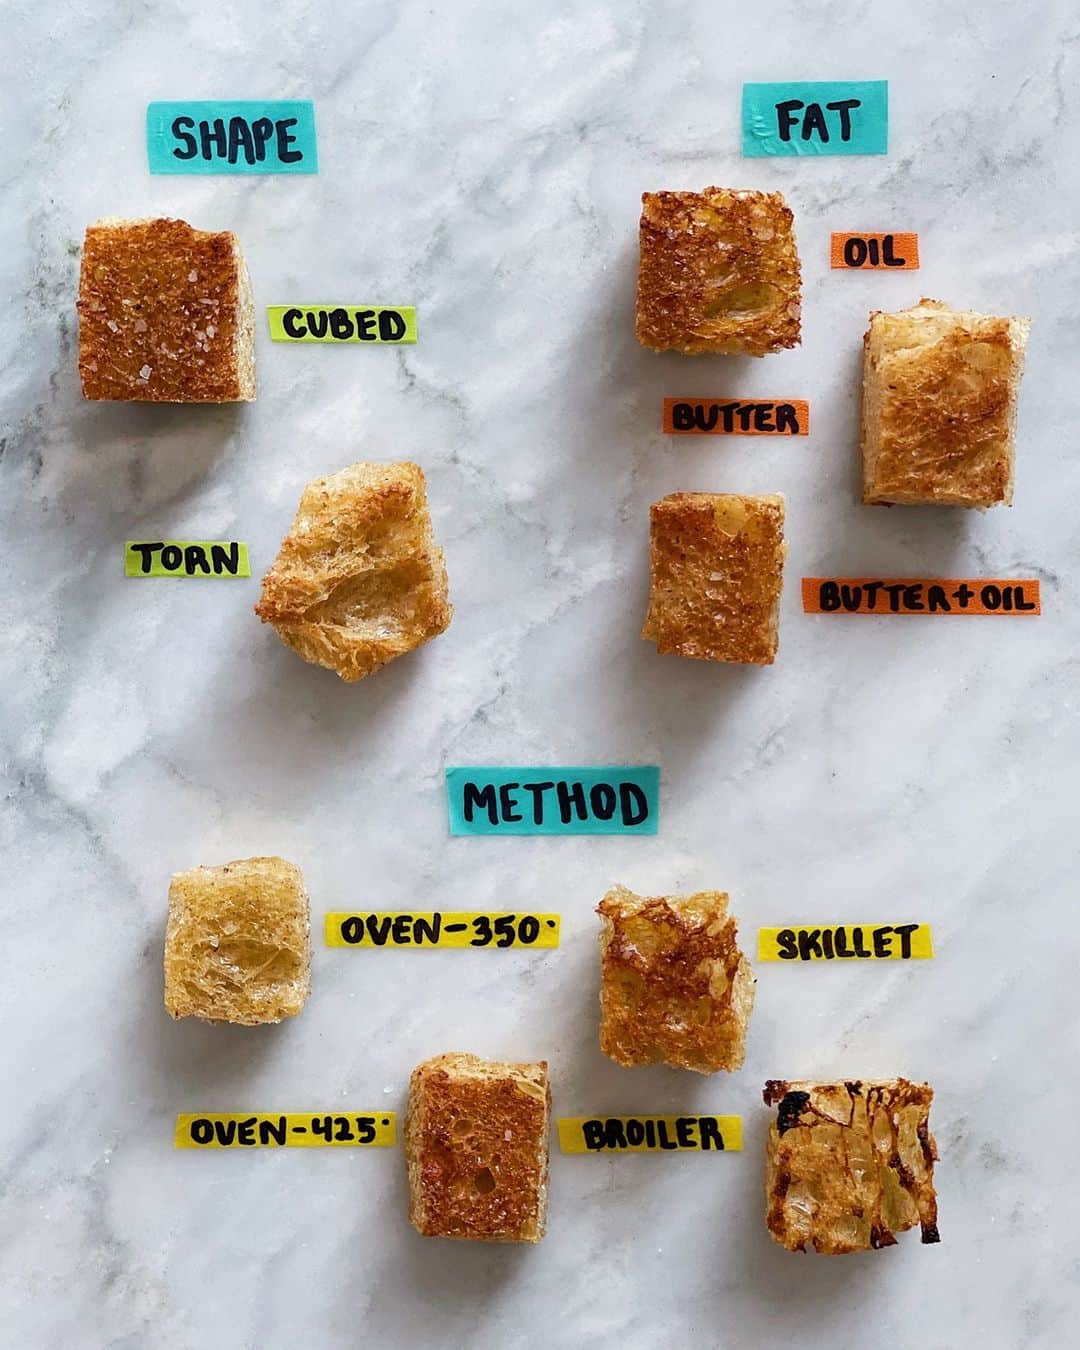 Food52のインスタグラム：「@equittner is back with her latest round of #AbsoluteBestTests: crouton edition. There was butter. There was oil. There was a skillet, an oven, and a broiler. Find out which croutons were very delicious and which were only sort of delicious at the link in our bio.」